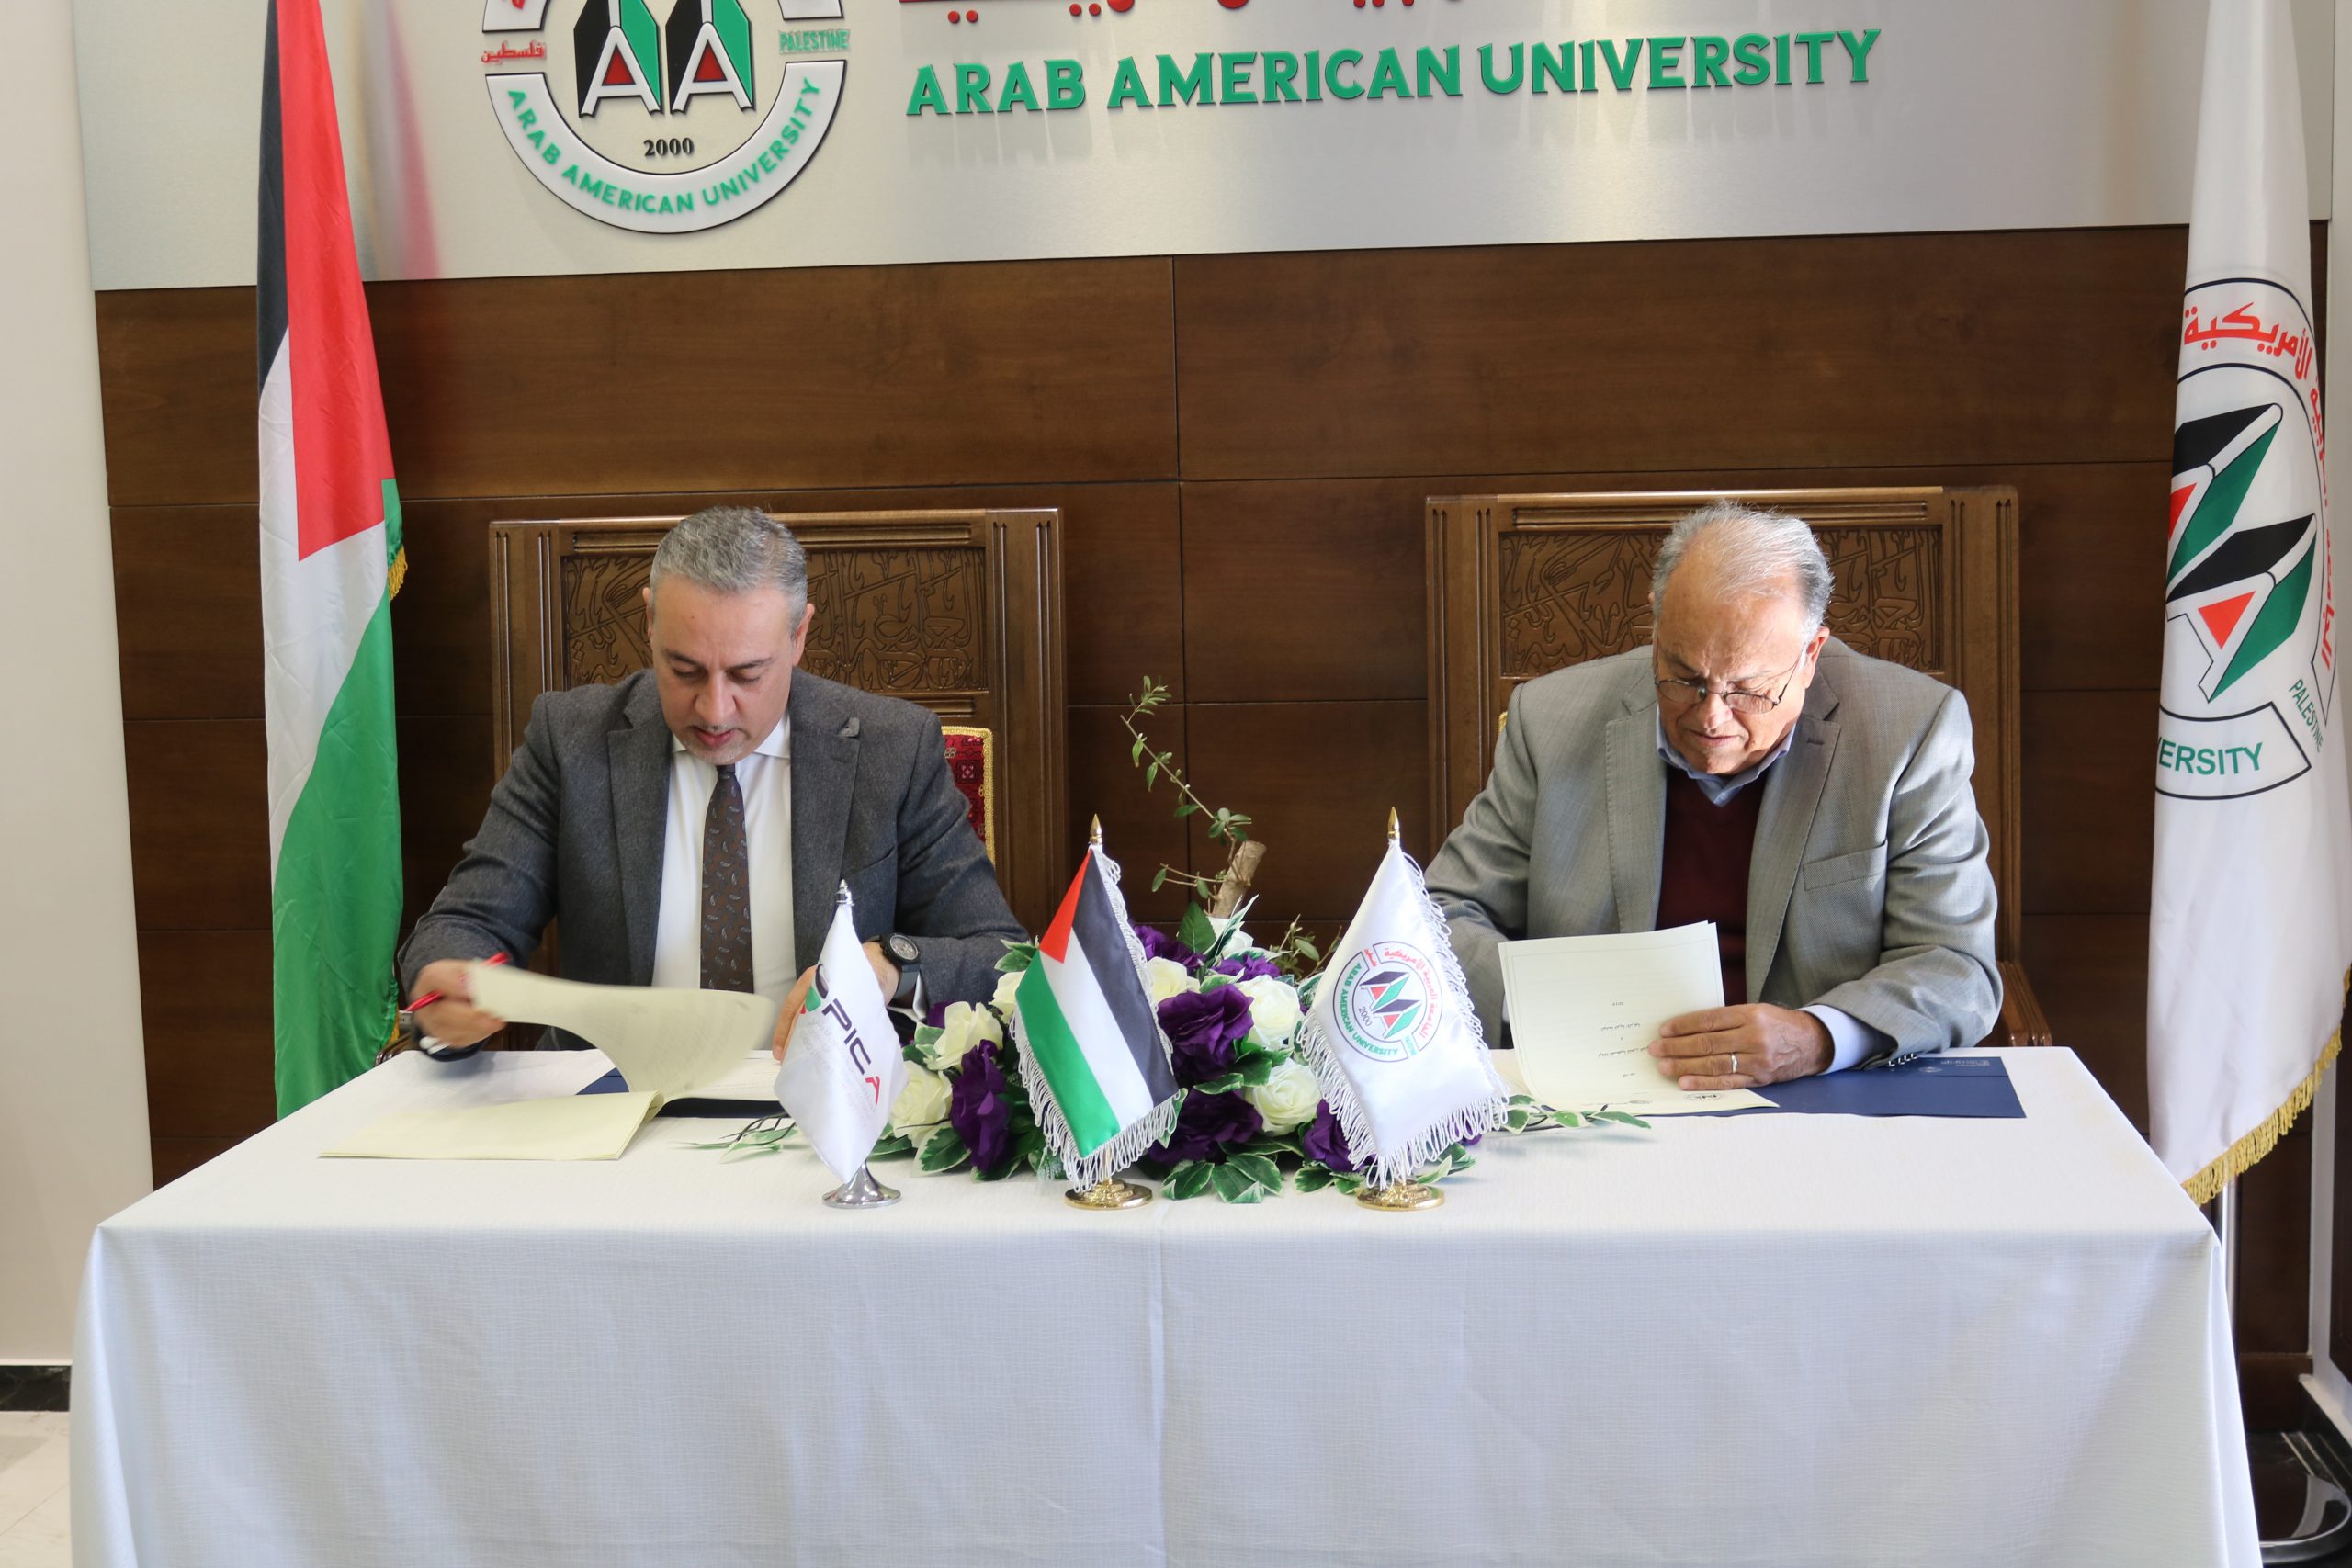 The Palestinian International Cooperation Agency (PICA ) and Arab American University (AAUP) Sign a Cooperation Agreement